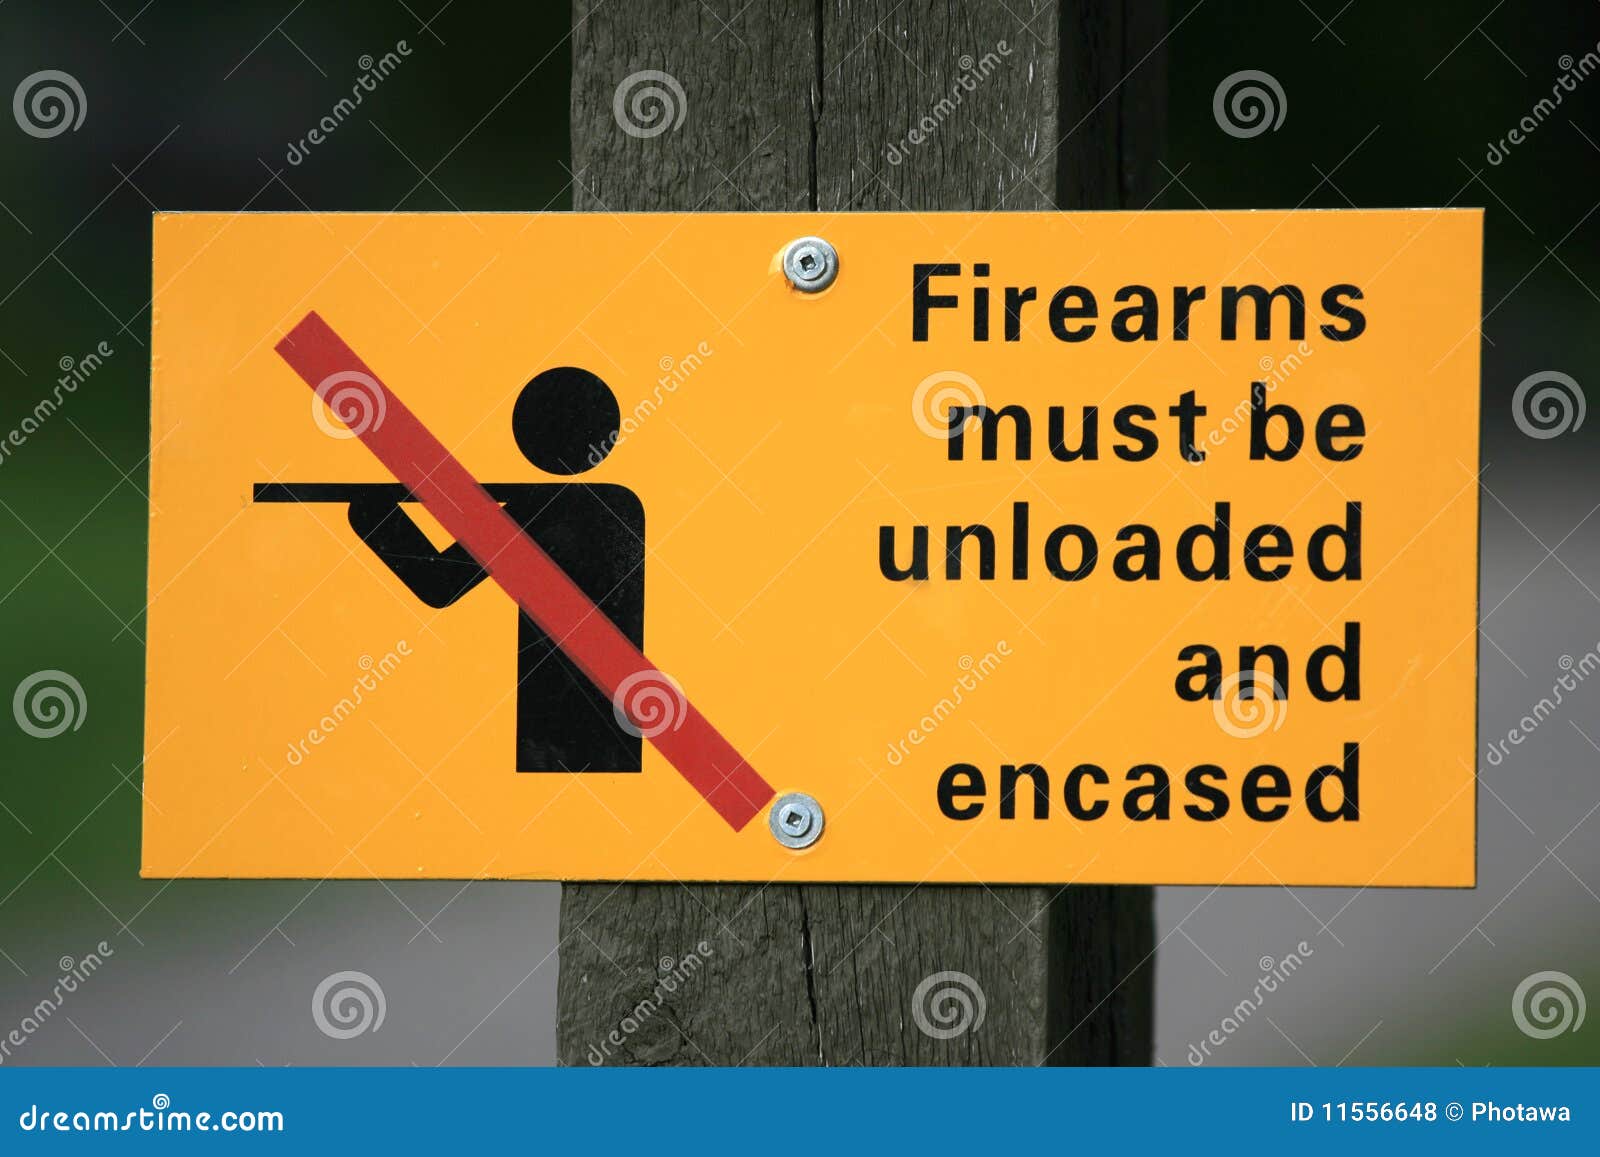 firearms sign